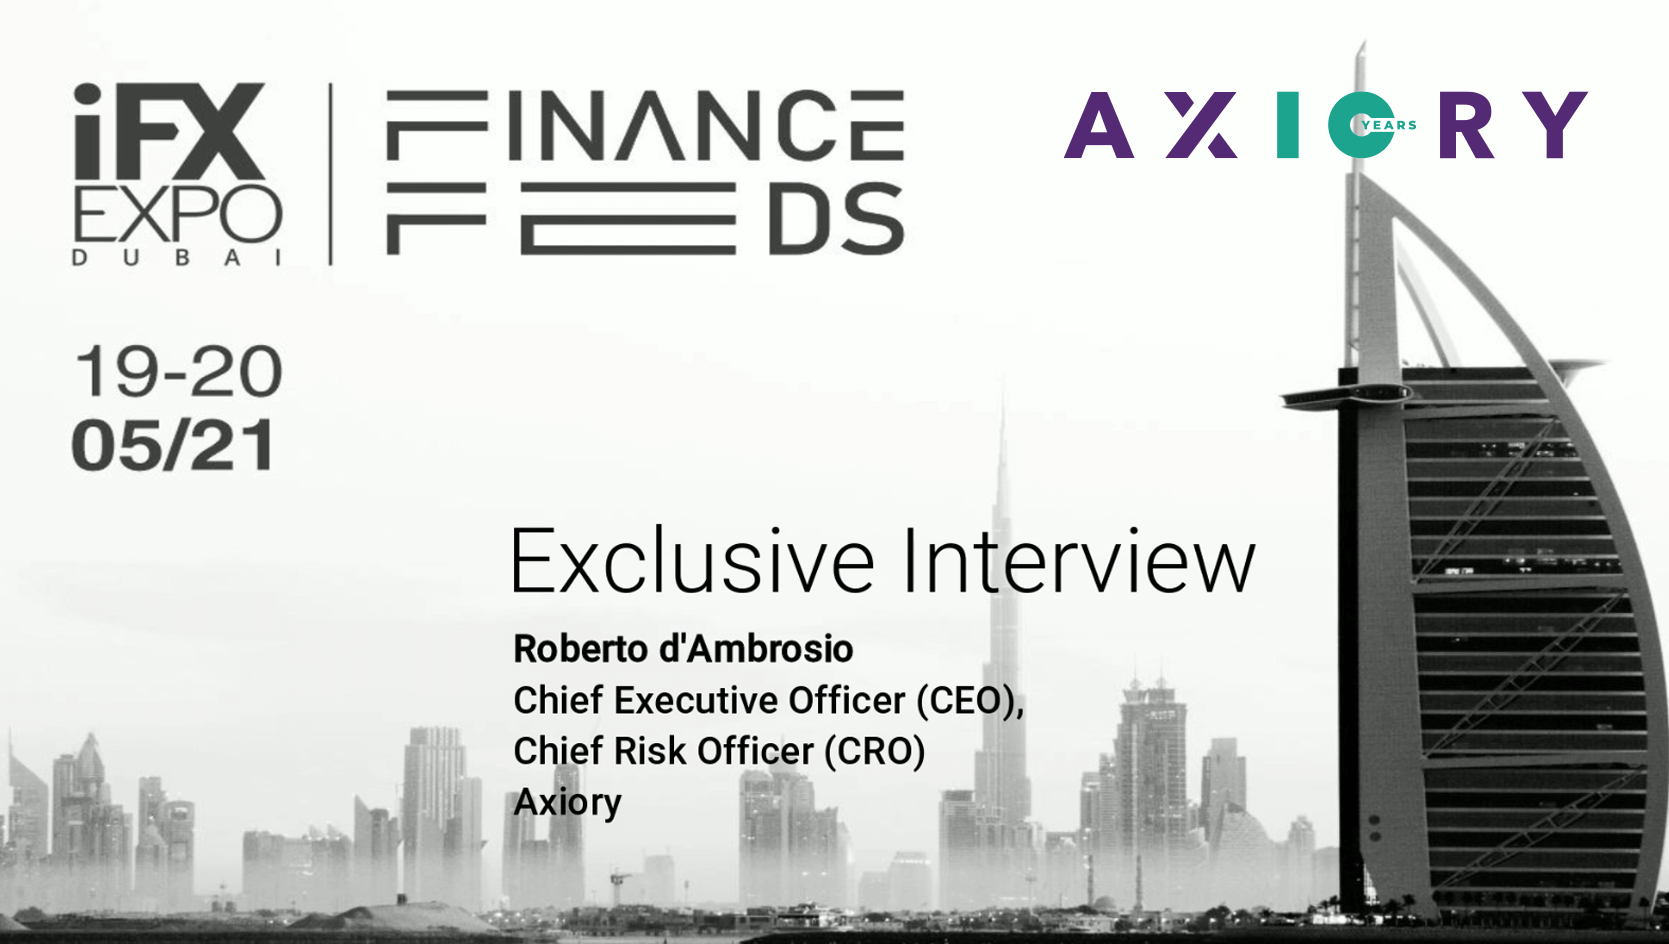 Watch Roberto d’Ambrosio’s Exclusive Interview with Finance Feeds at the iFX EXPO Dubai 2021